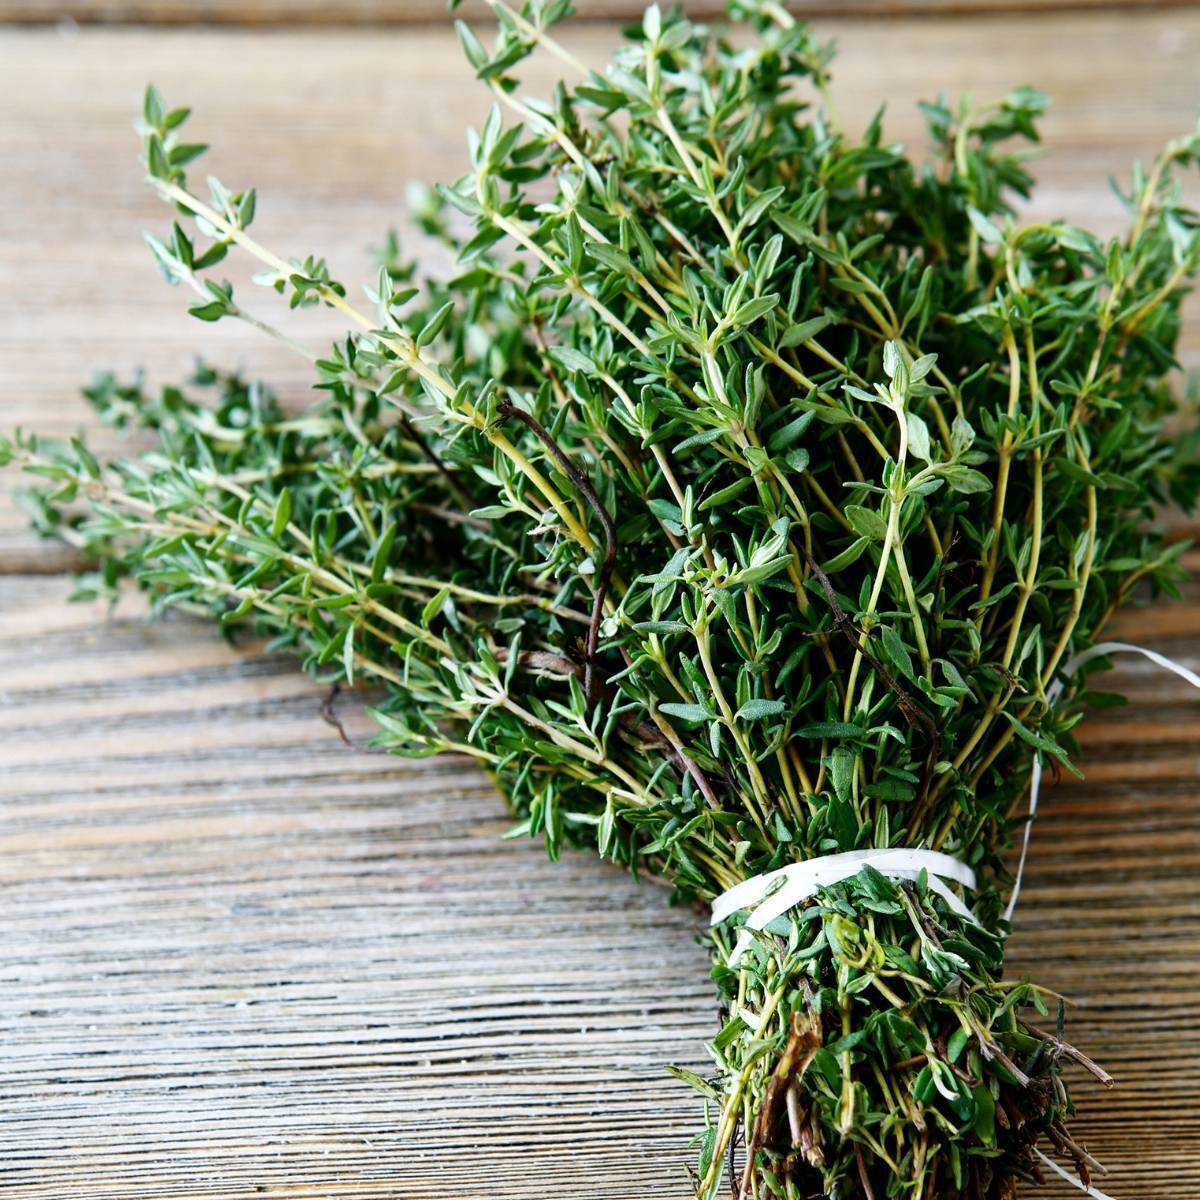 1 bunch fresh thyme to dried